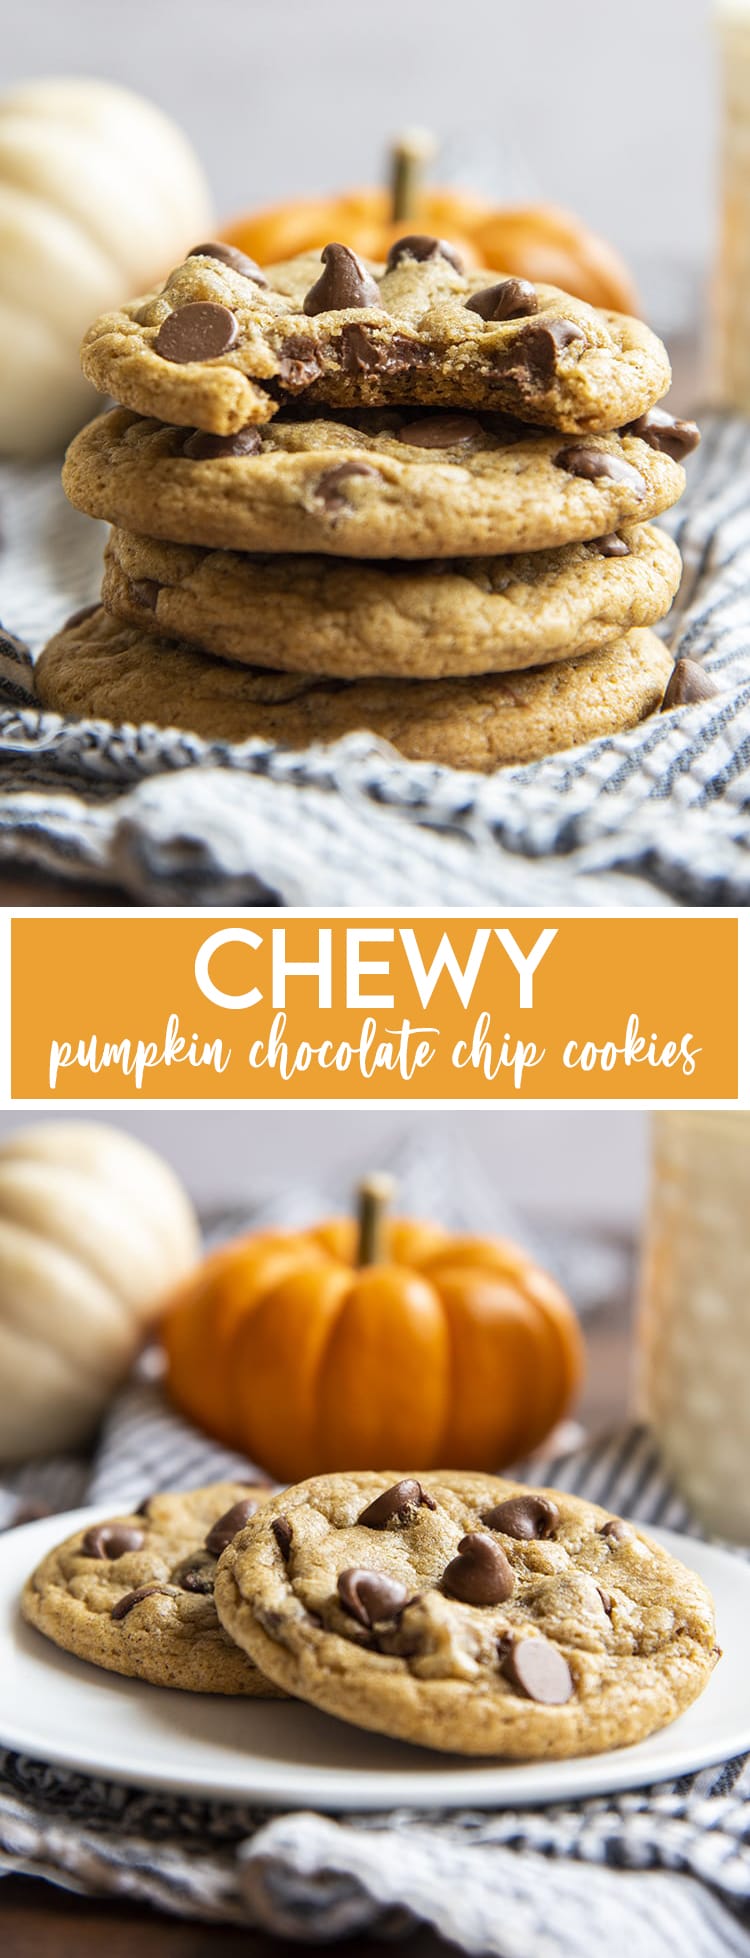 A collage of two images showing chewy pumpkin chocolate cookies with text overlay of same title.